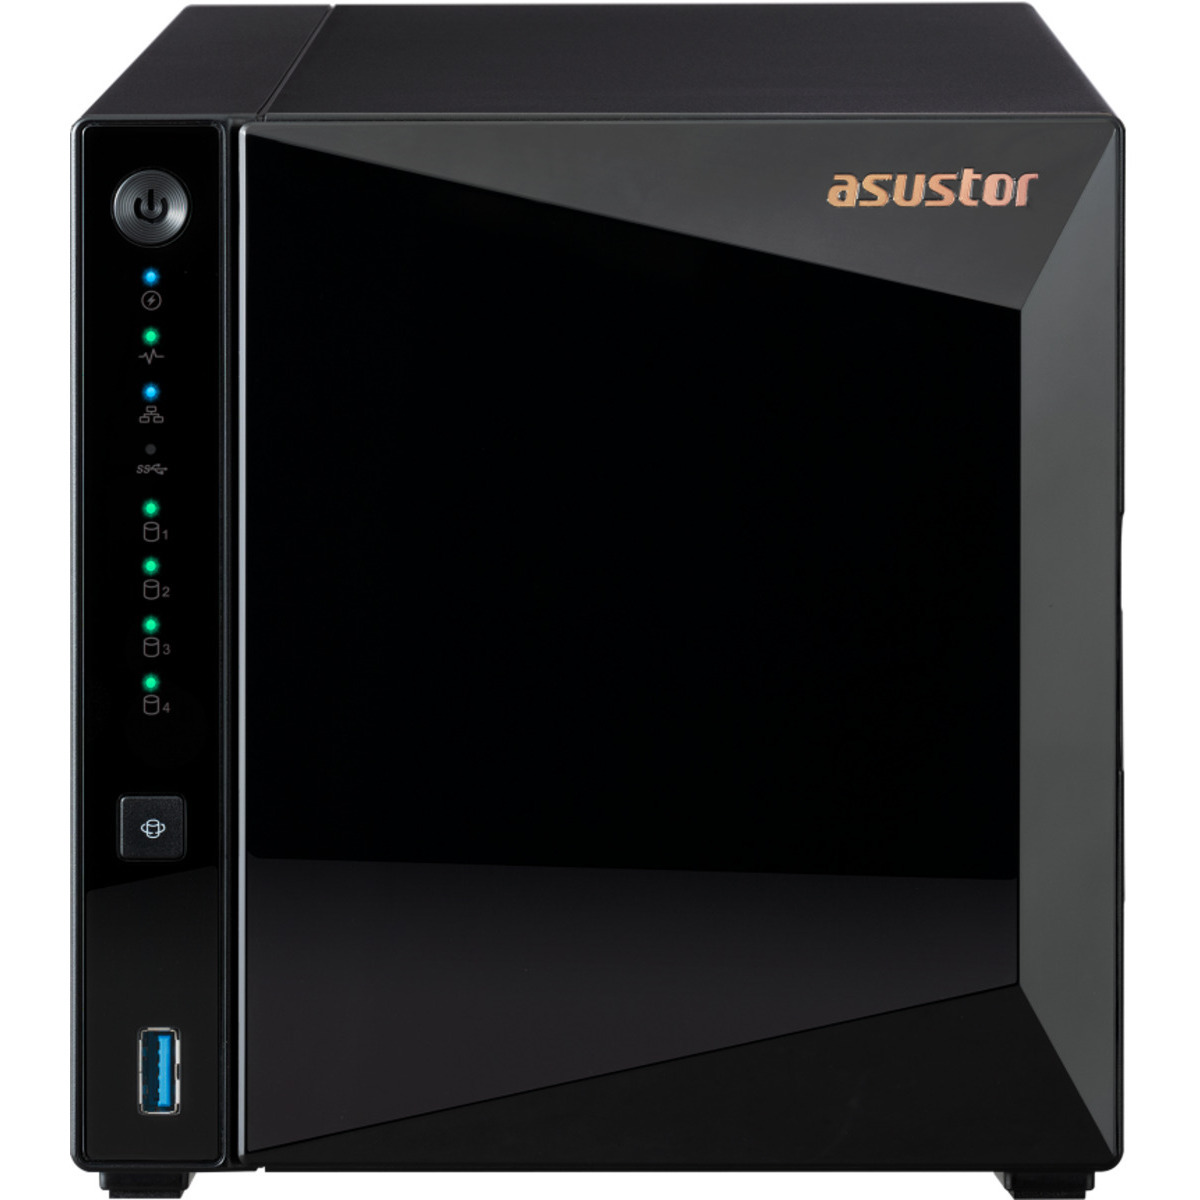 ASUSTOR DRIVESTOR 4 Pro AS3304T 32tb 4-Bay Desktop Personal / Basic Home / Small Office NAS - Network Attached Storage Device 4x8tb Seagate IronWolf Pro ST8000NT001 3.5 7200rpm SATA 6Gb/s HDD NAS Class Drives Installed - Burn-In Tested - ON SALE DRIVESTOR 4 Pro AS3304T